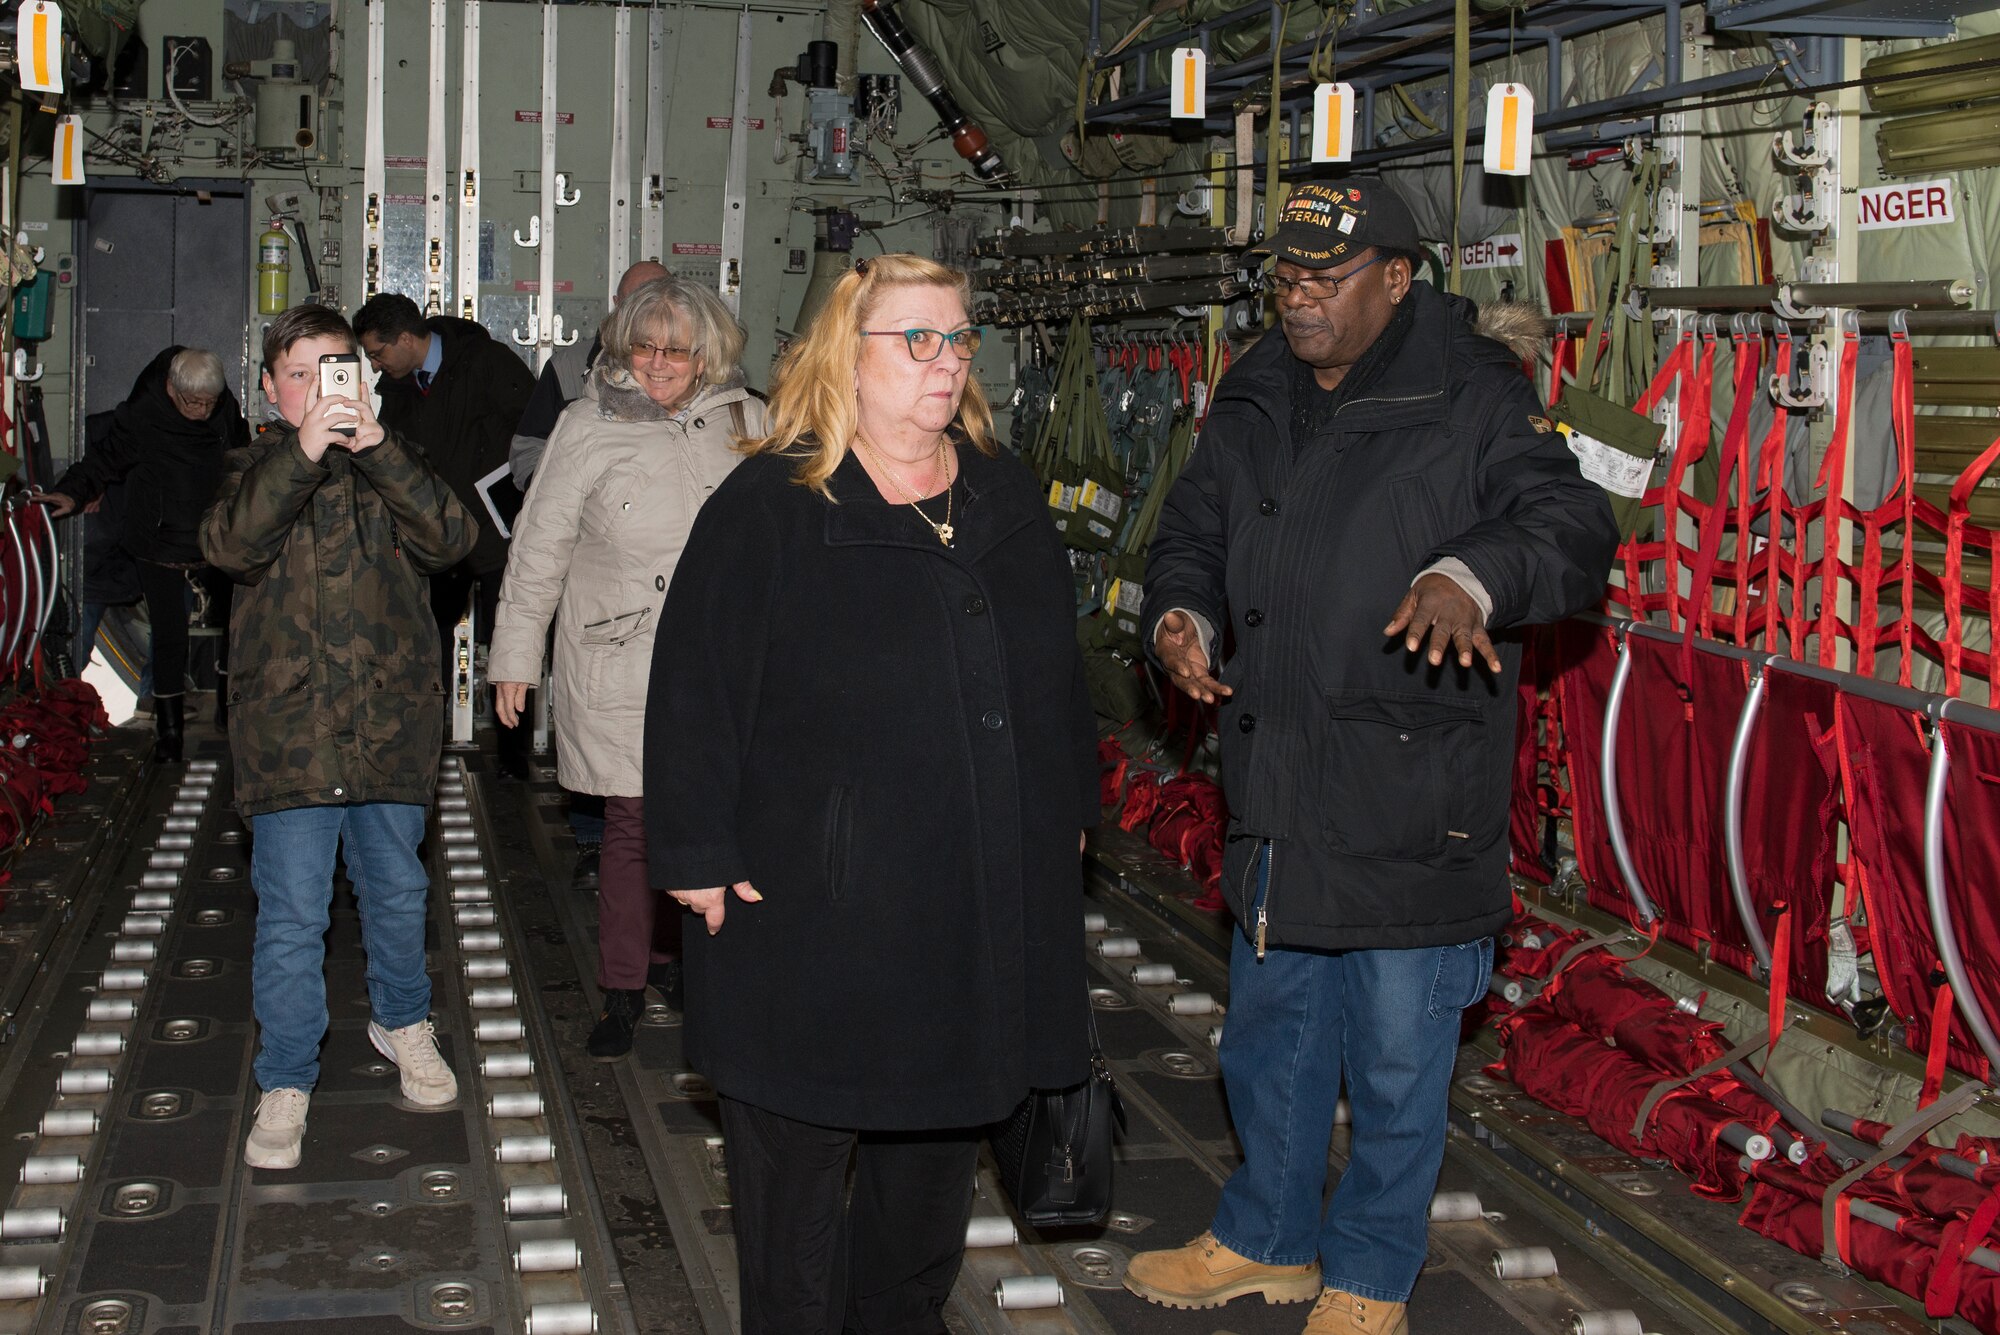 Calvin Churchill, right, discusses the intricacies of the C-130J Hercules aircraft with his wife Lourdes Soriano, left, at Ramstein Air Base, Germany, Dec. 6, 2019.  Earlier in the day, the couple attended a length-of-service ceremony where Soriano was recognized for 20 years of U.S. government service.